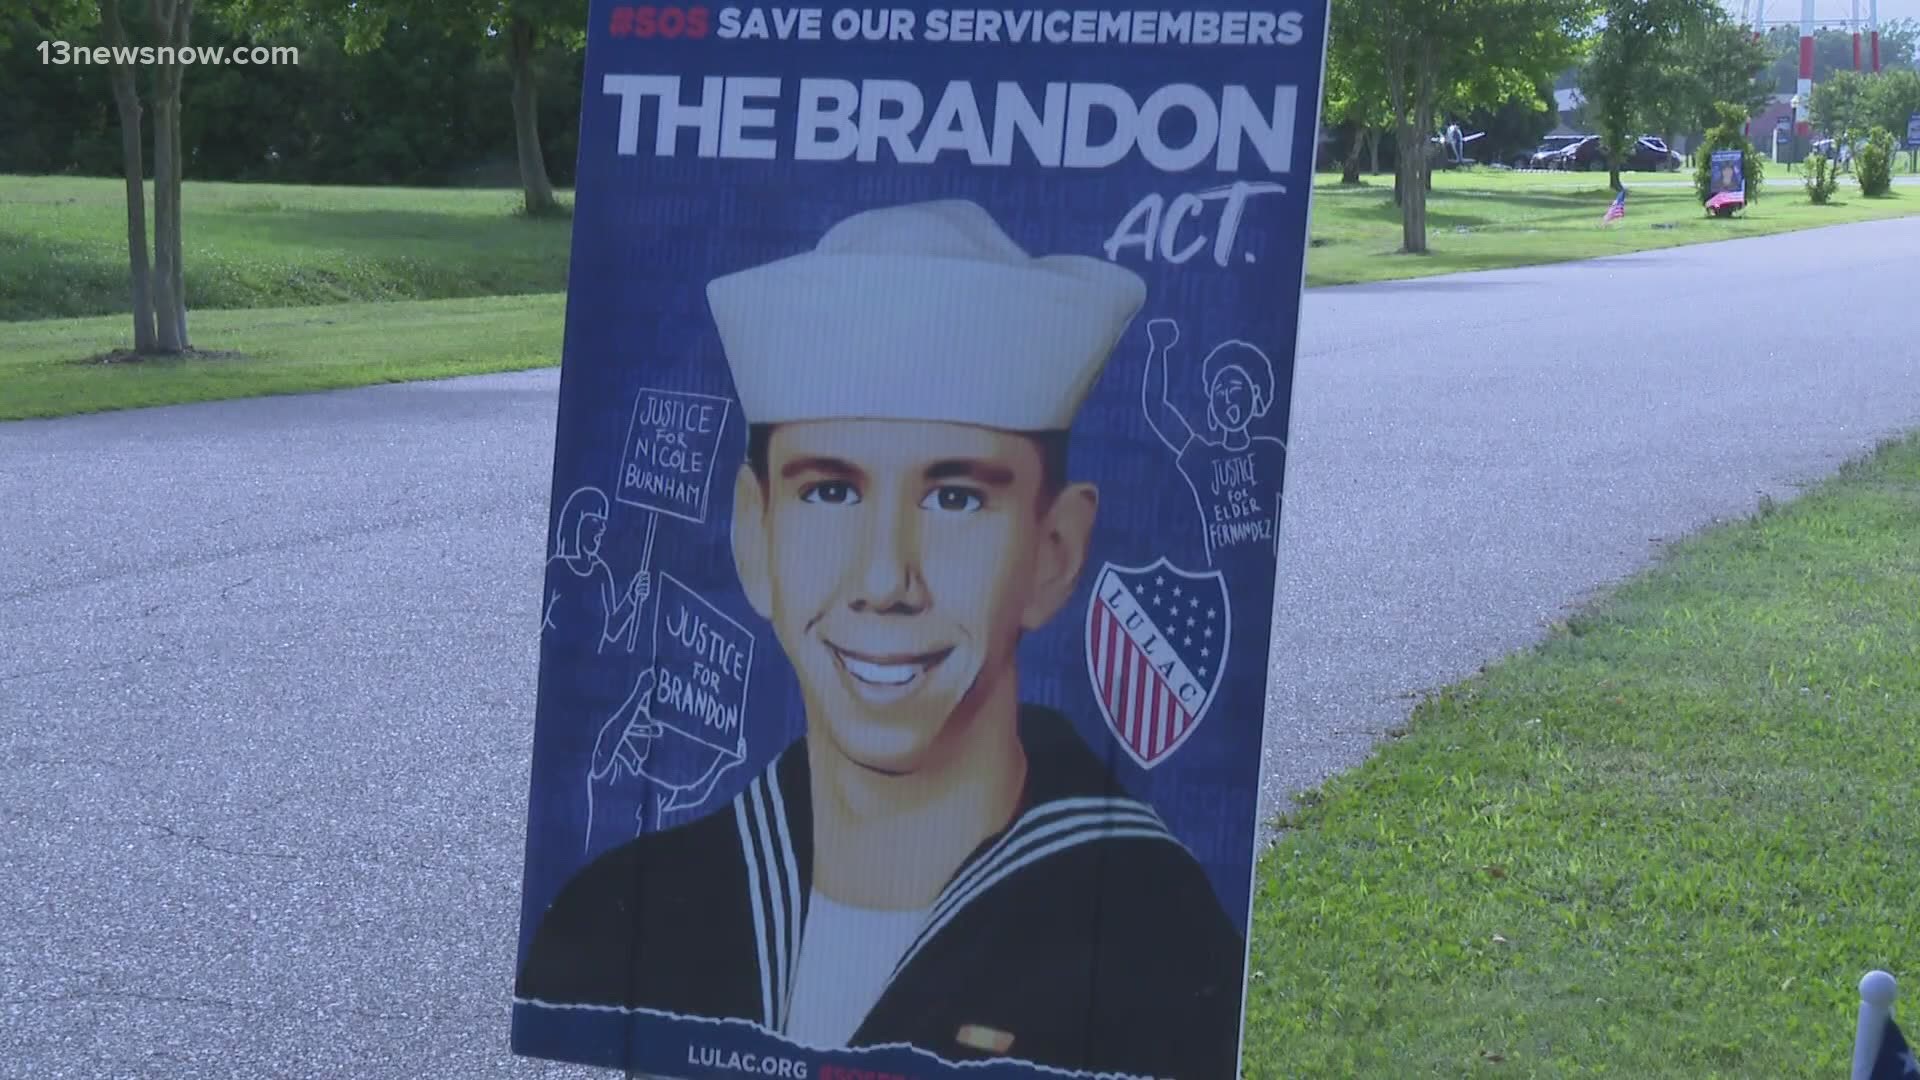 It's been 3 years since sailor Brandon Caserta took his own life. His parents now say that they feel more hopeful than ever in the push to pass 'The Brandon Act.'